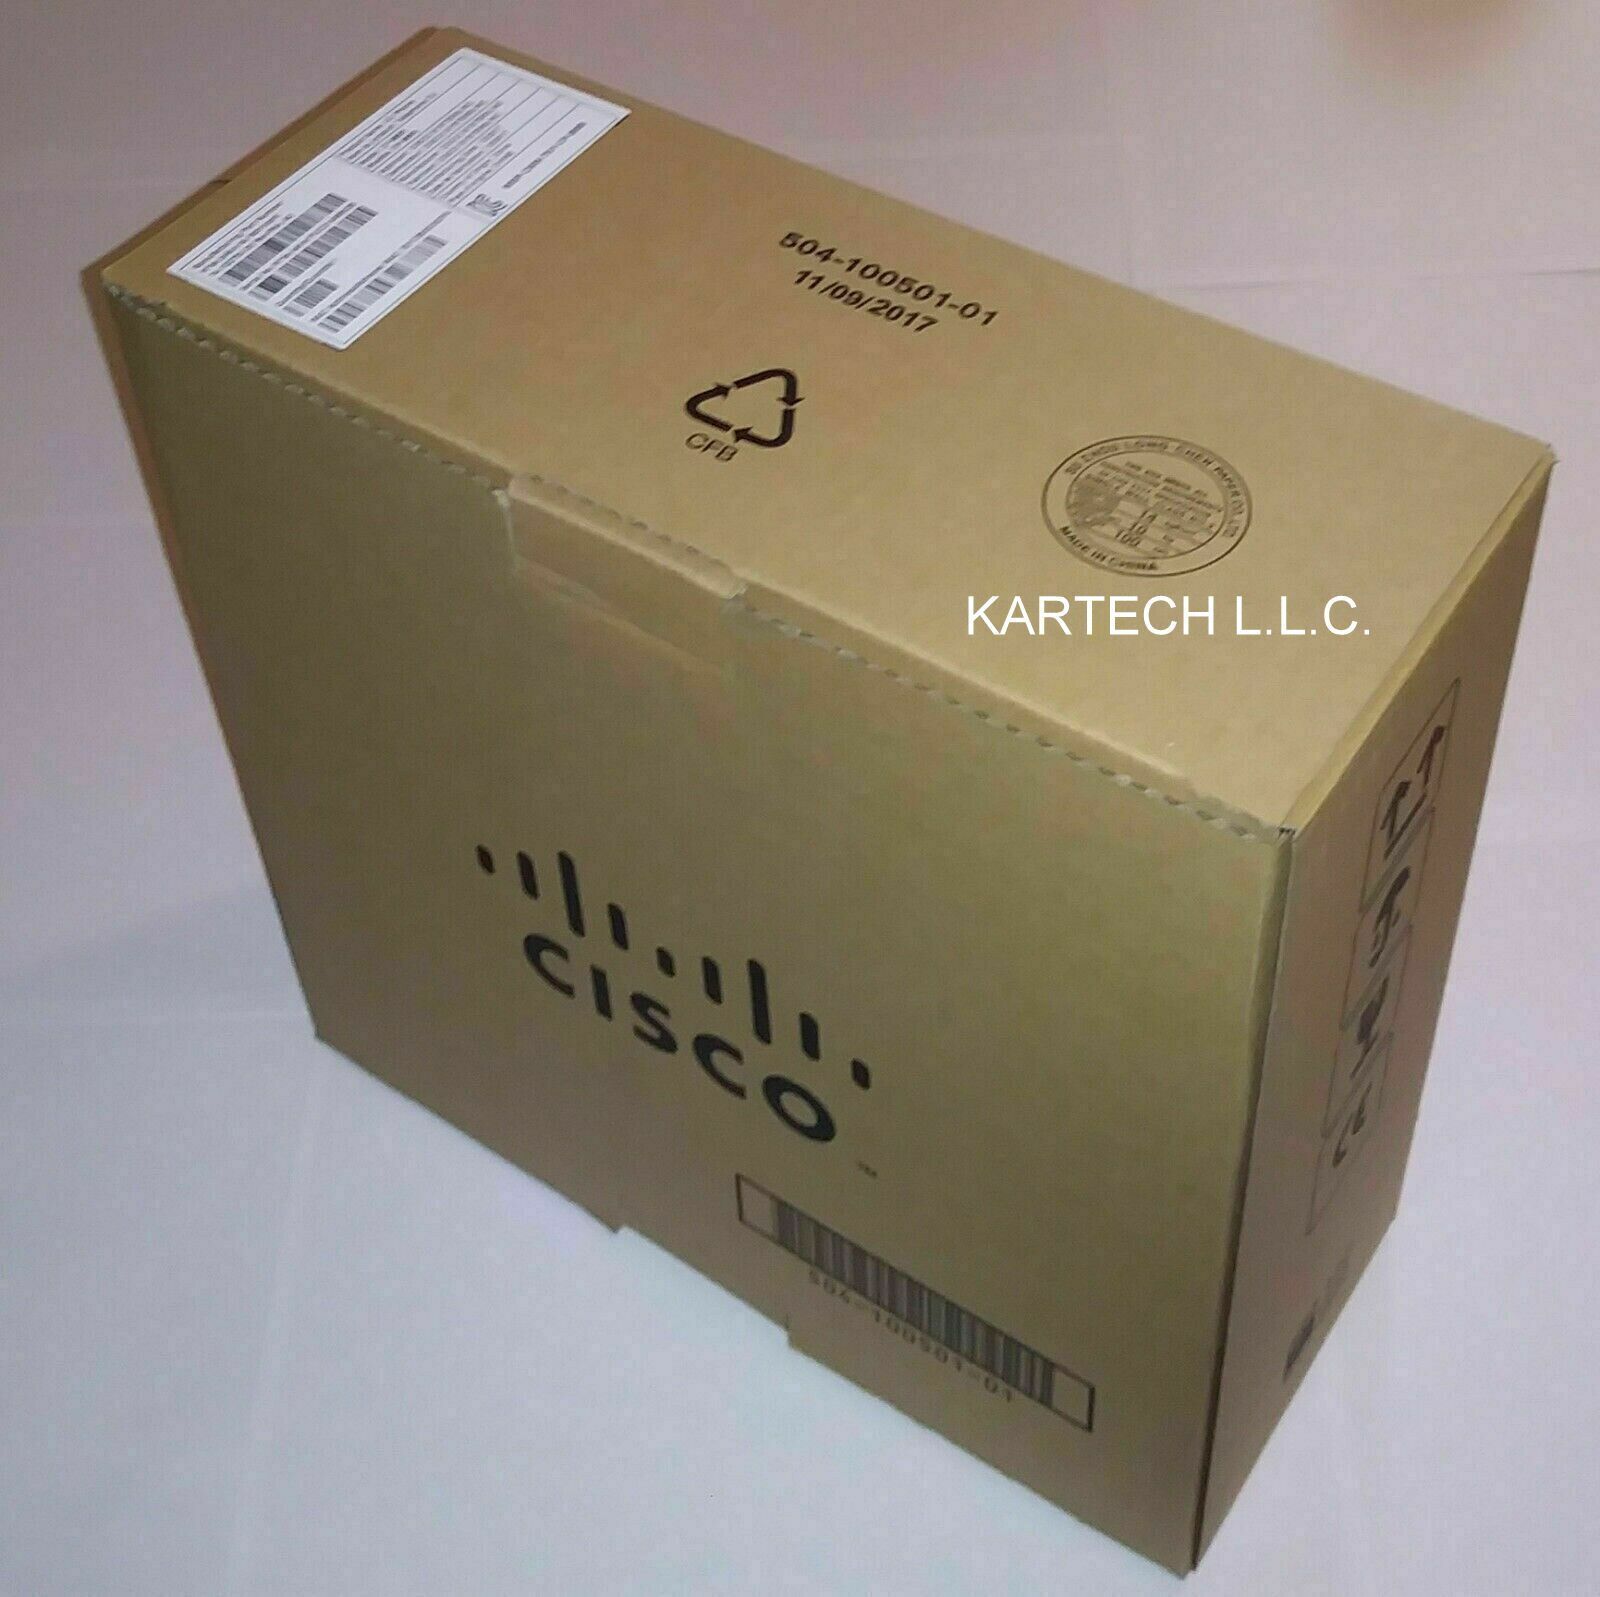 NEW Cisco 8800 Ser. CP-8865-K9 Unified IP Endpoint VoIP Video Phone 